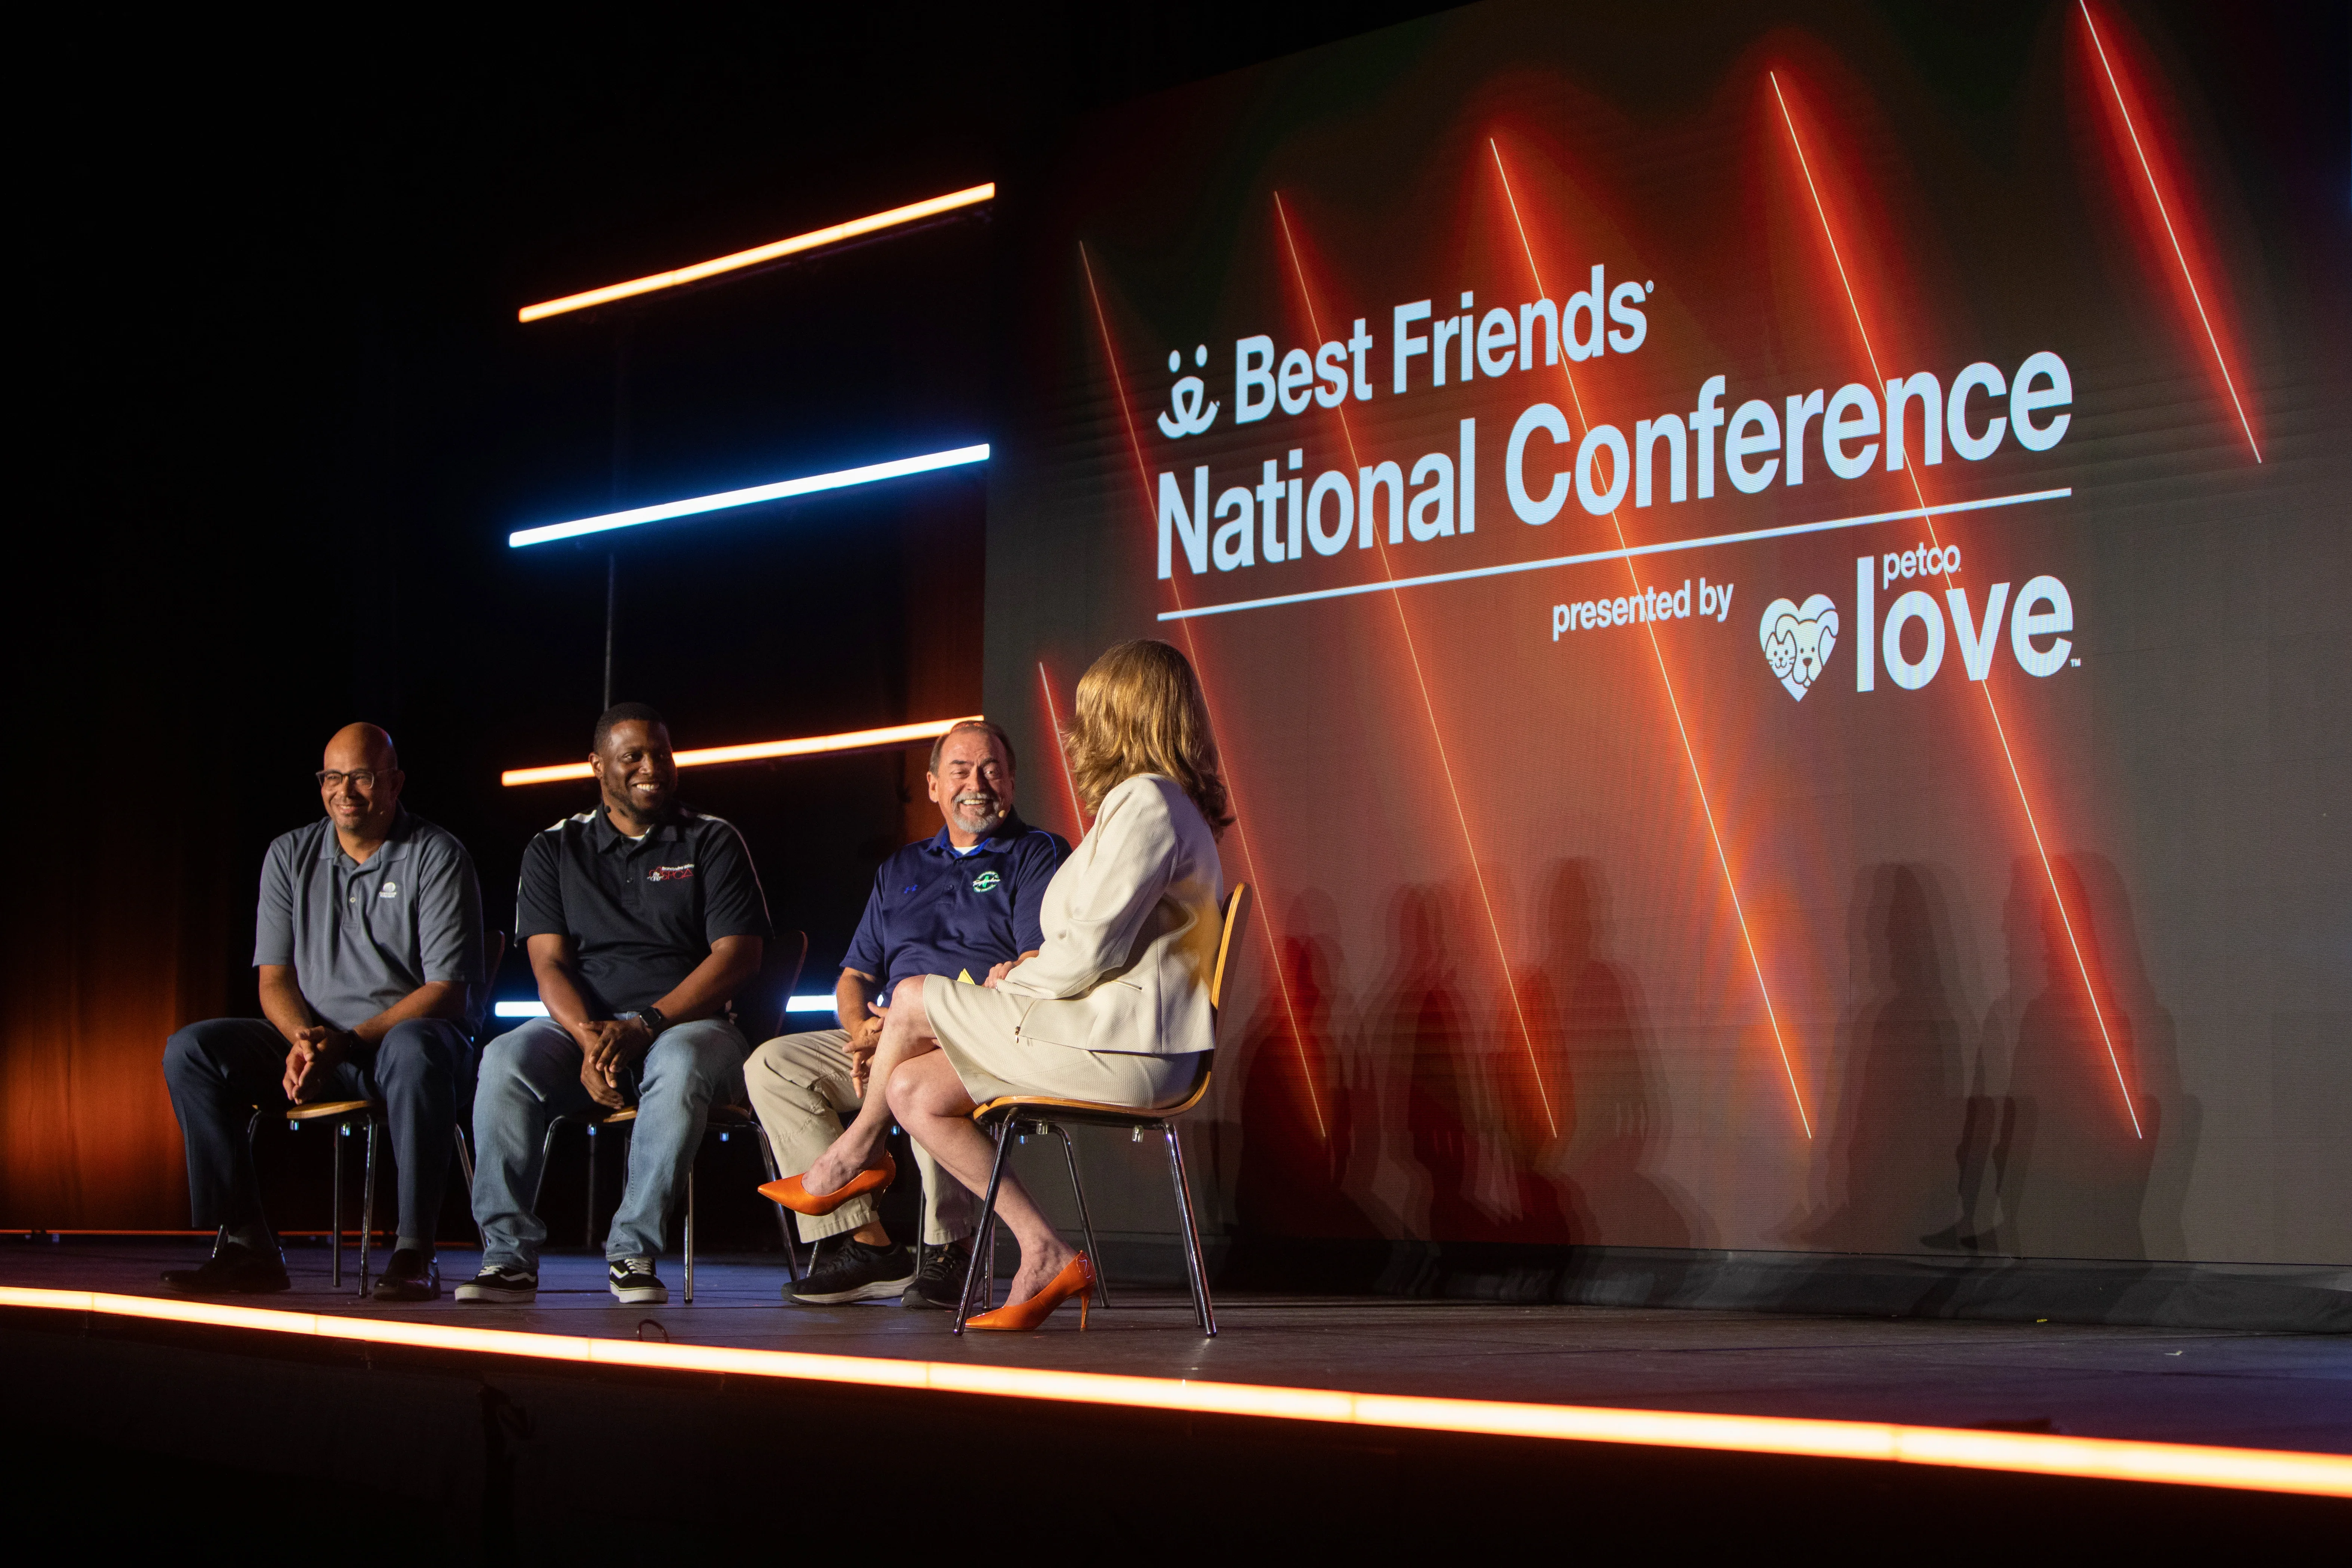 Speakers on stage at the Best Friends National Conference